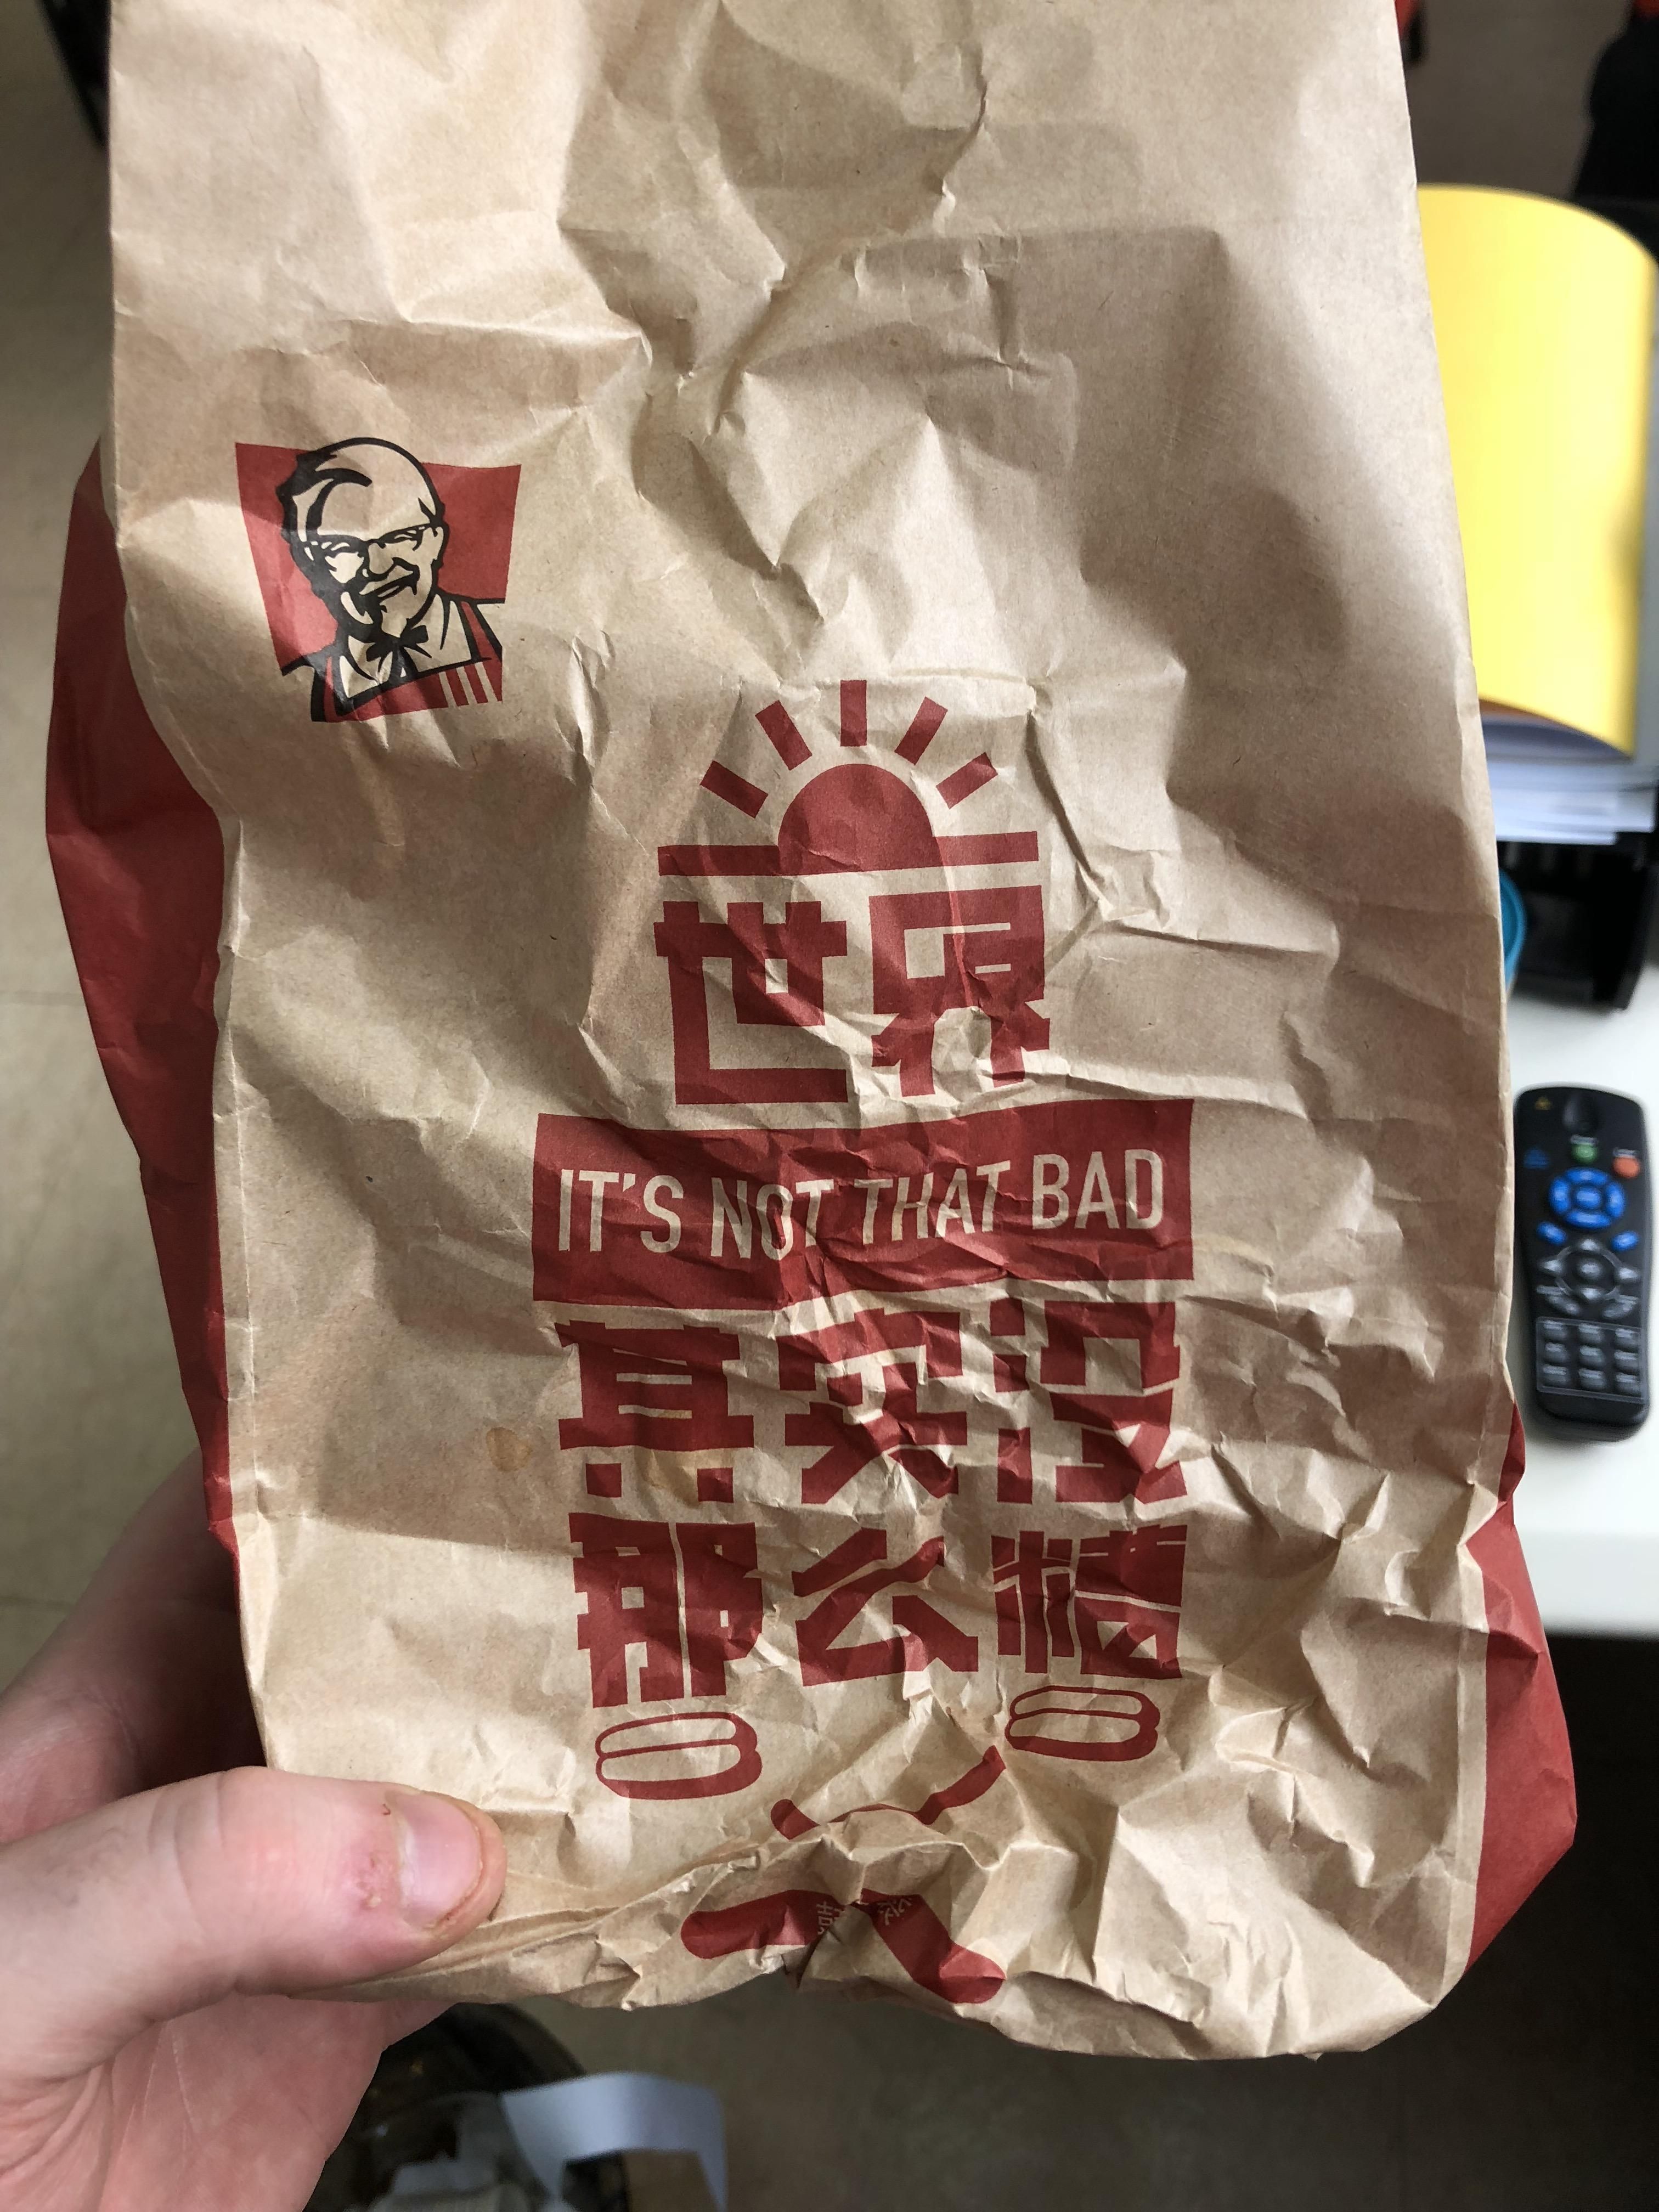 Chinese KFC is all about honesty